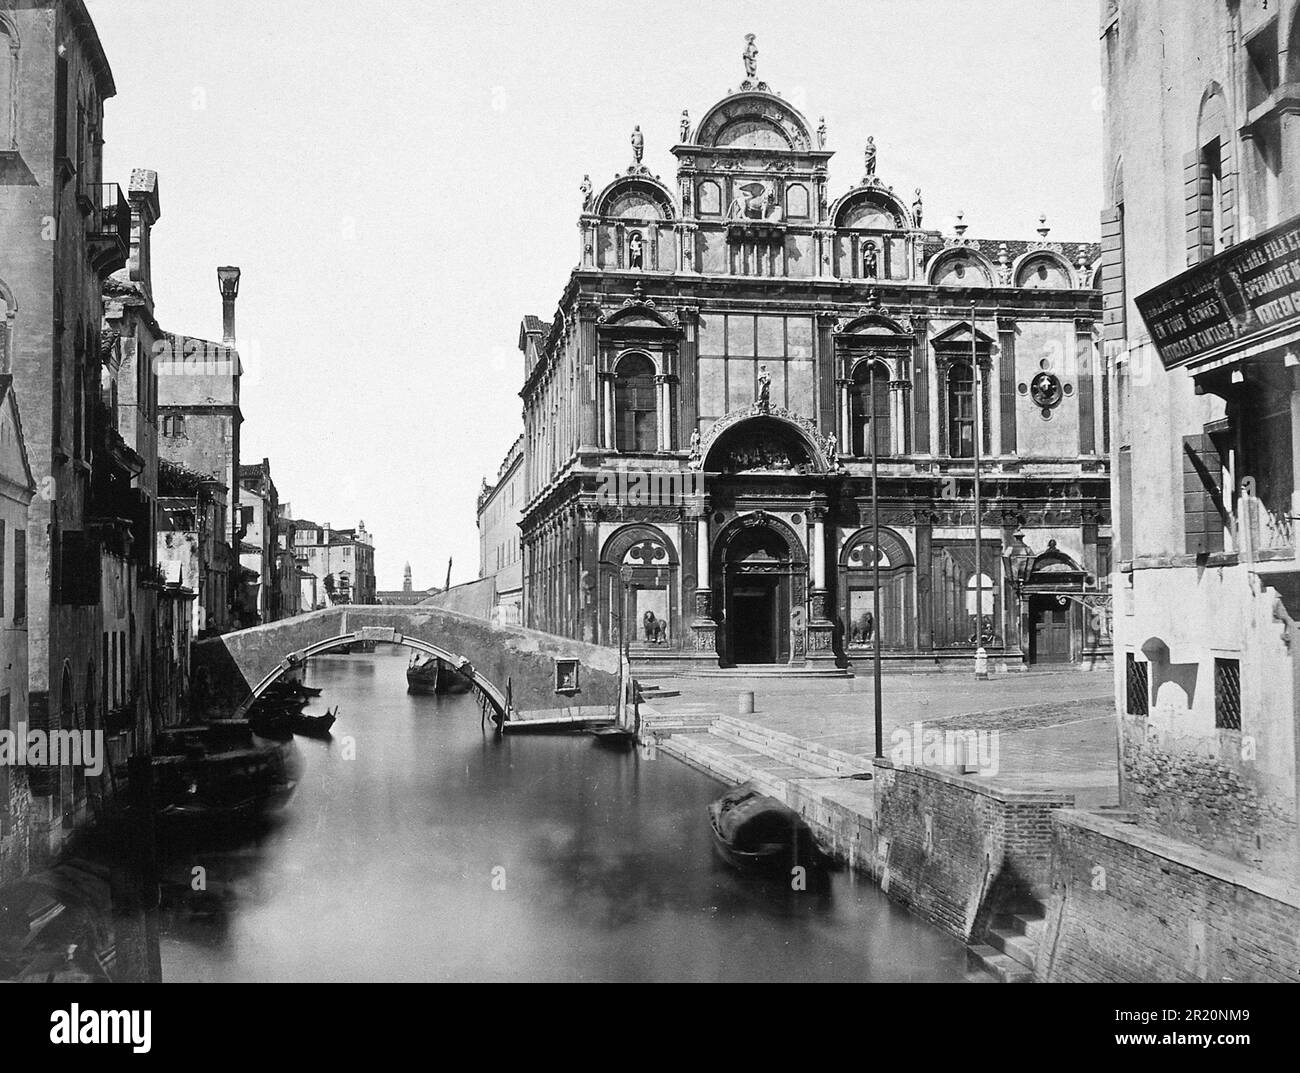 Campo Santi Giovanni e Paolo, Santi Giovanni e Paolo, Venetian San Zanipolo or just Zanipolo, at just under 100 m long, is one of the largest churches in Venice, Scuola Grande and Hospital of San Marco, 1870, Italy, Historic, digitally restored reproduction from an 18th or 19th century original  /  Campo Santi Giovanni e Paolo, Santi Giovanni e Paolo, venetisch San Zanipolo oder nur Zanipolo, ist mit knapp 100 m Länge eine der größten Kirchen in Venedig, Scuola Grande und Krankenhaus von San Marco, 1870, Italien, Historisch, digital restaurierte Reproduktion von einer Vorlage aus dem 18. oder Stock Photo